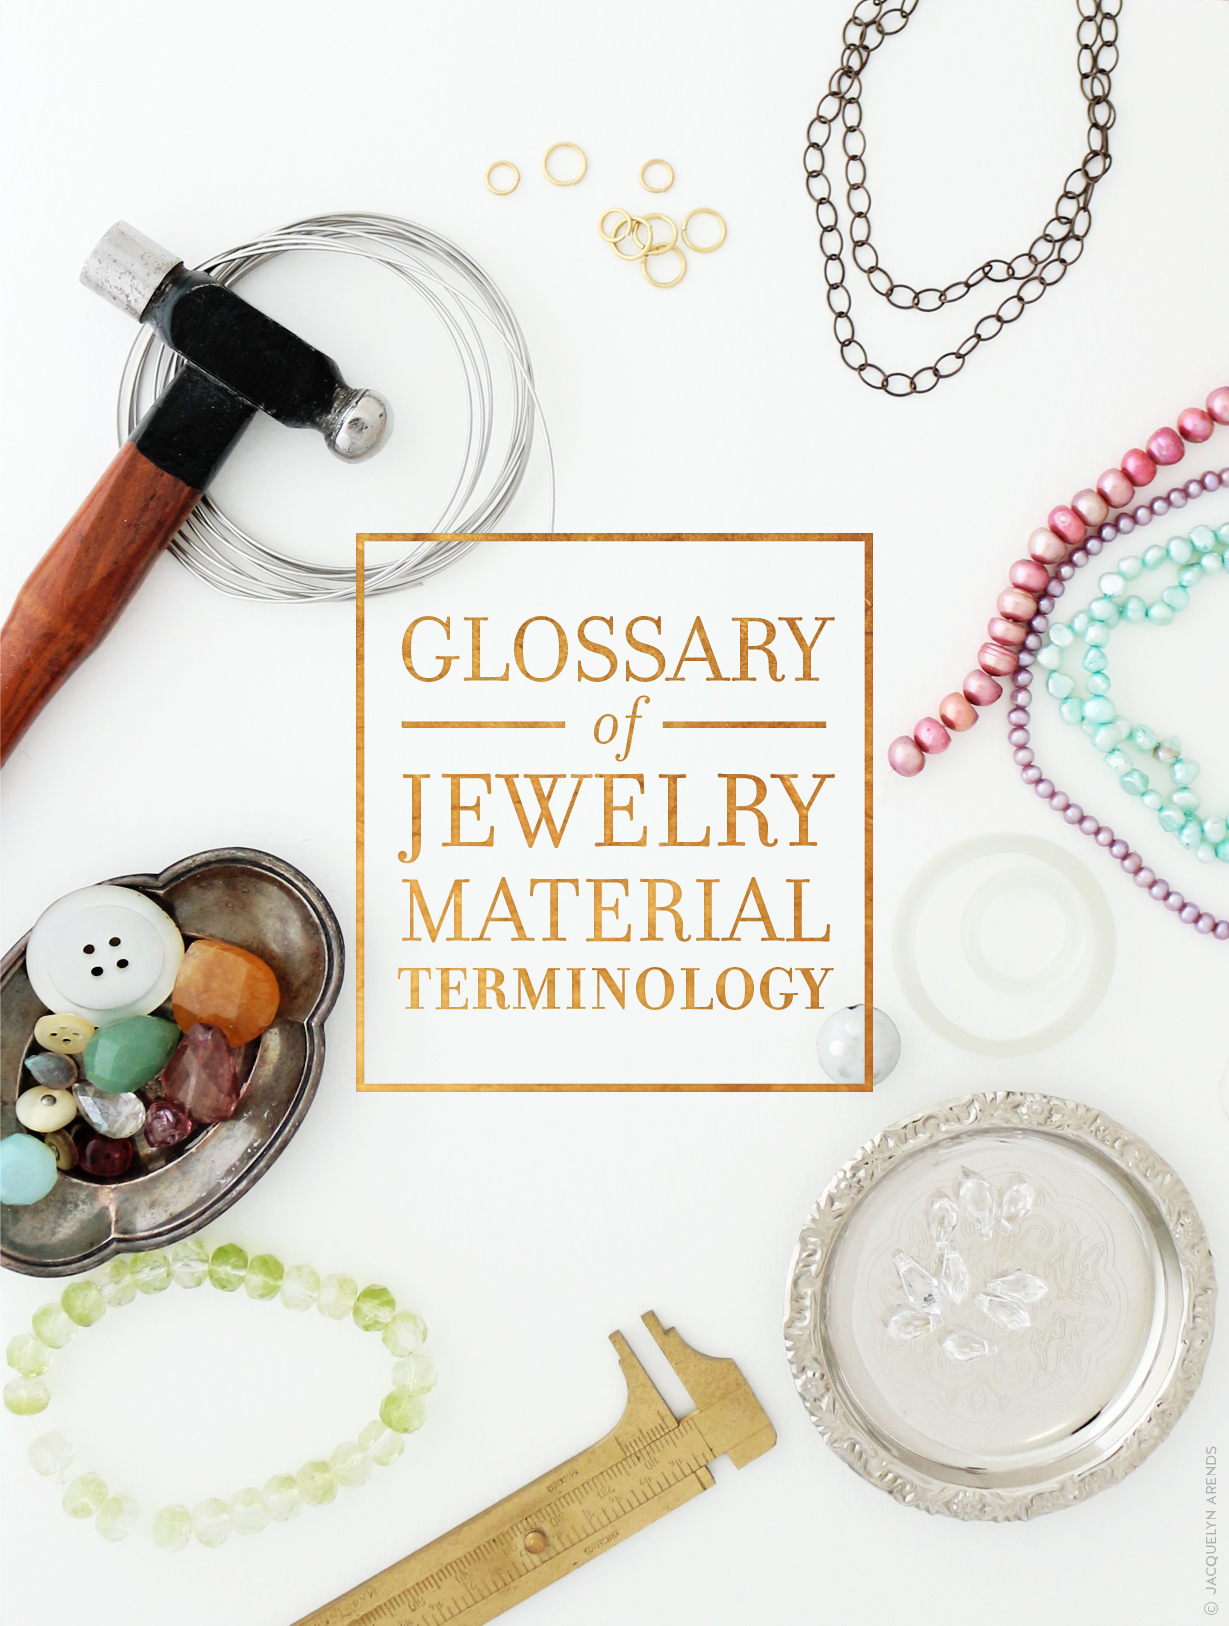 Glossary of Jewelry Material Terminology blog post image © Jacquelyn Arends